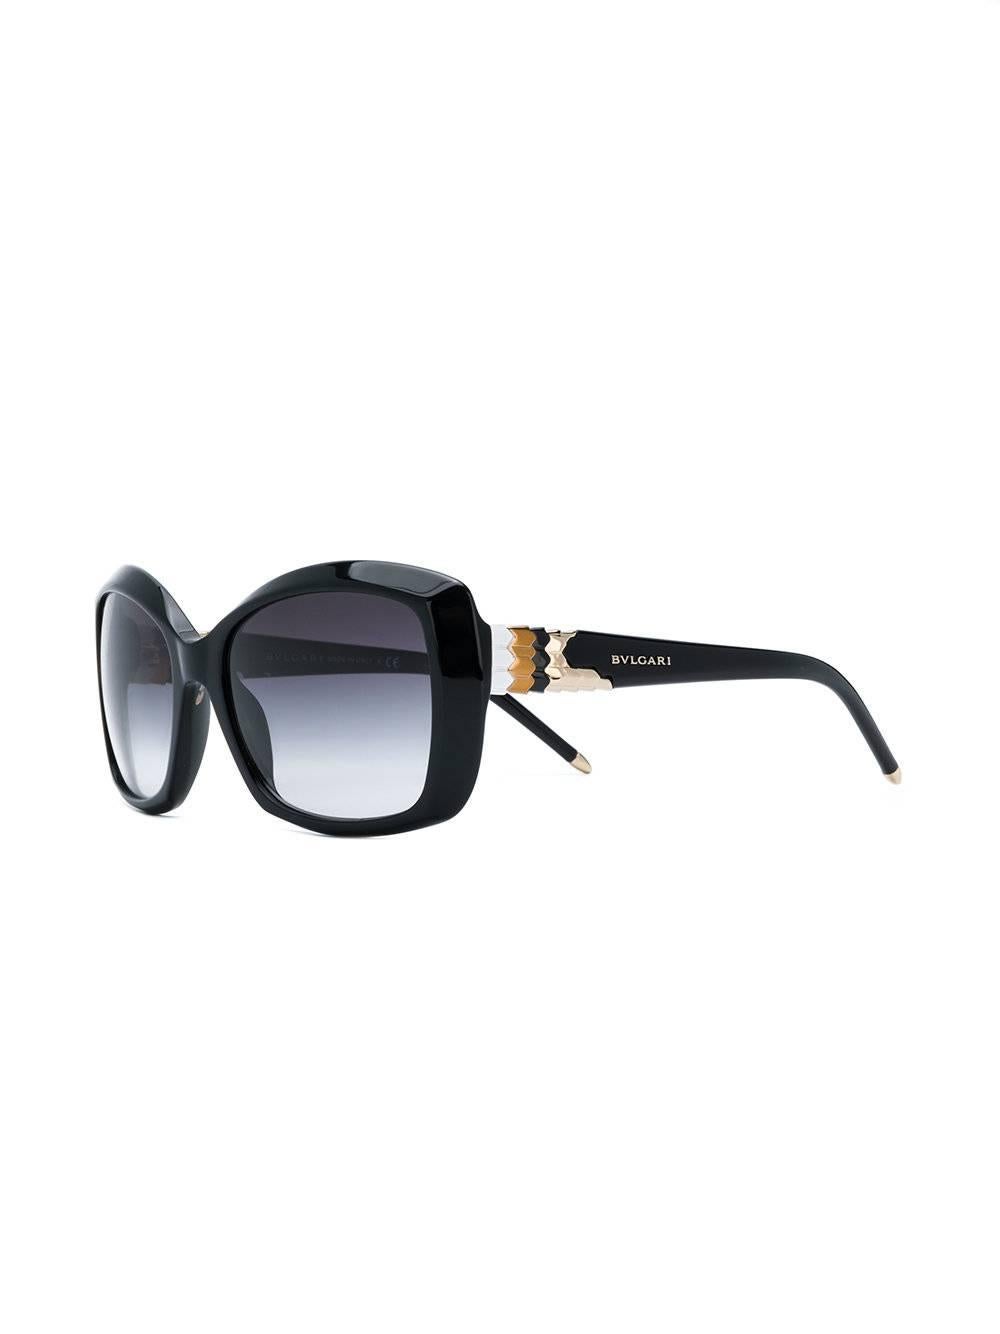 Add some edge to your look with these square-frame sunglasses by Bulgari, in black with metal embellishments. 

This item comes with a protective case.

Colour: Black

Material: Plastic

Measurements: Depth: 14cm, Circumference: 5.6cm, Bridge Width: